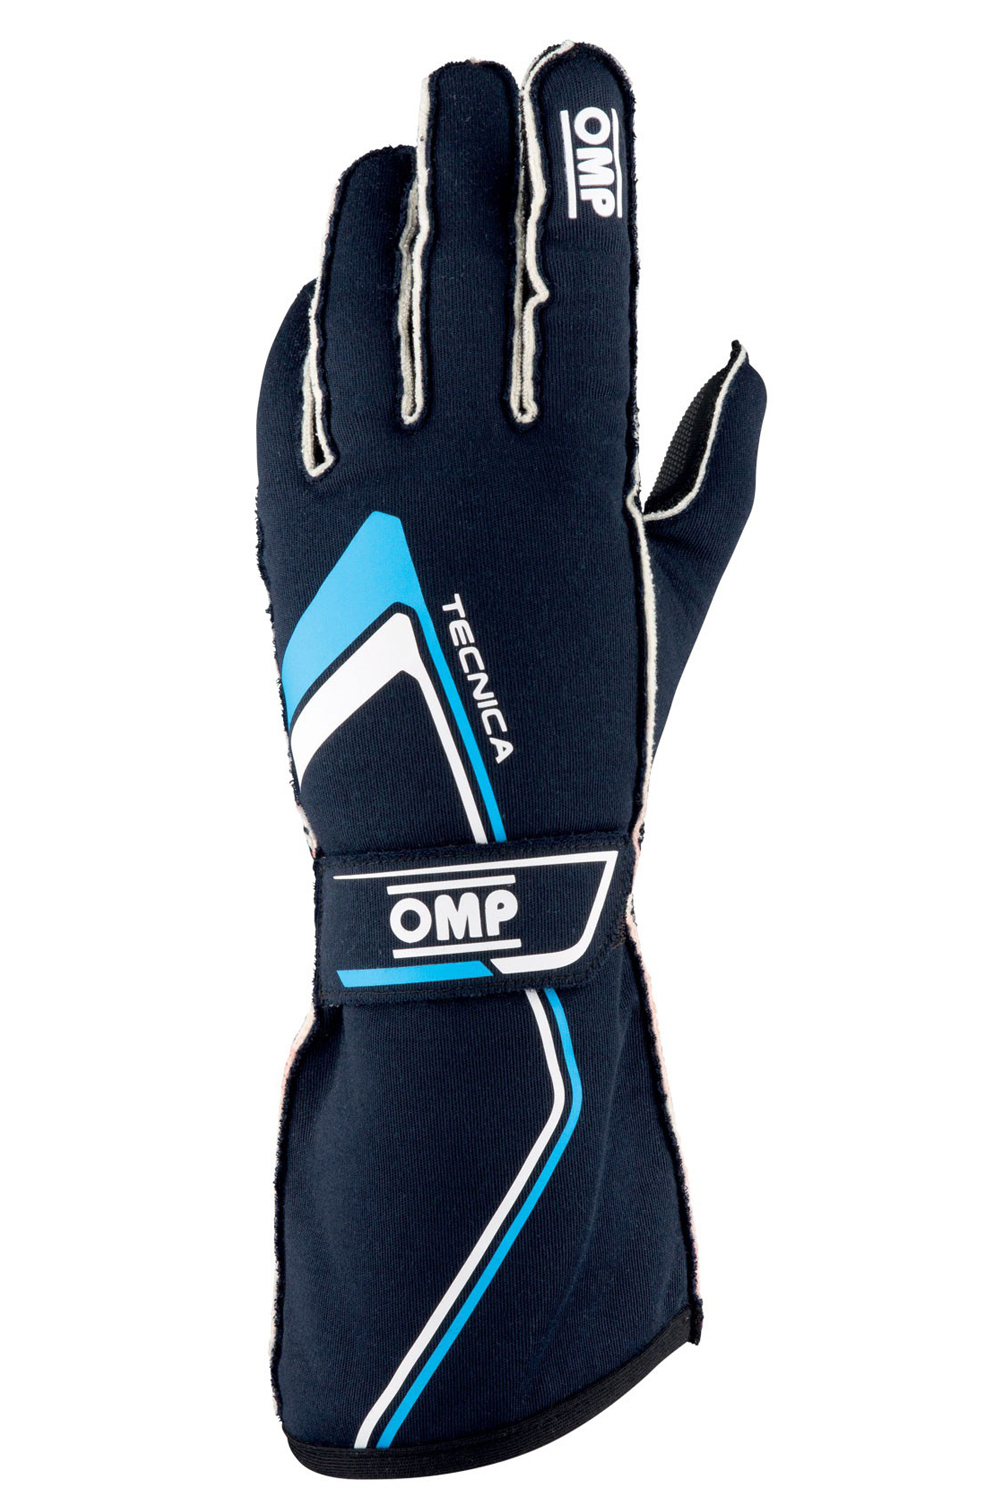 OMP Racing IB772BCS Driving Gloves, Tecnica, FIA Approved, Double Layer, Fire Retardant Fabric, Blue / Cyan, Small, Pair